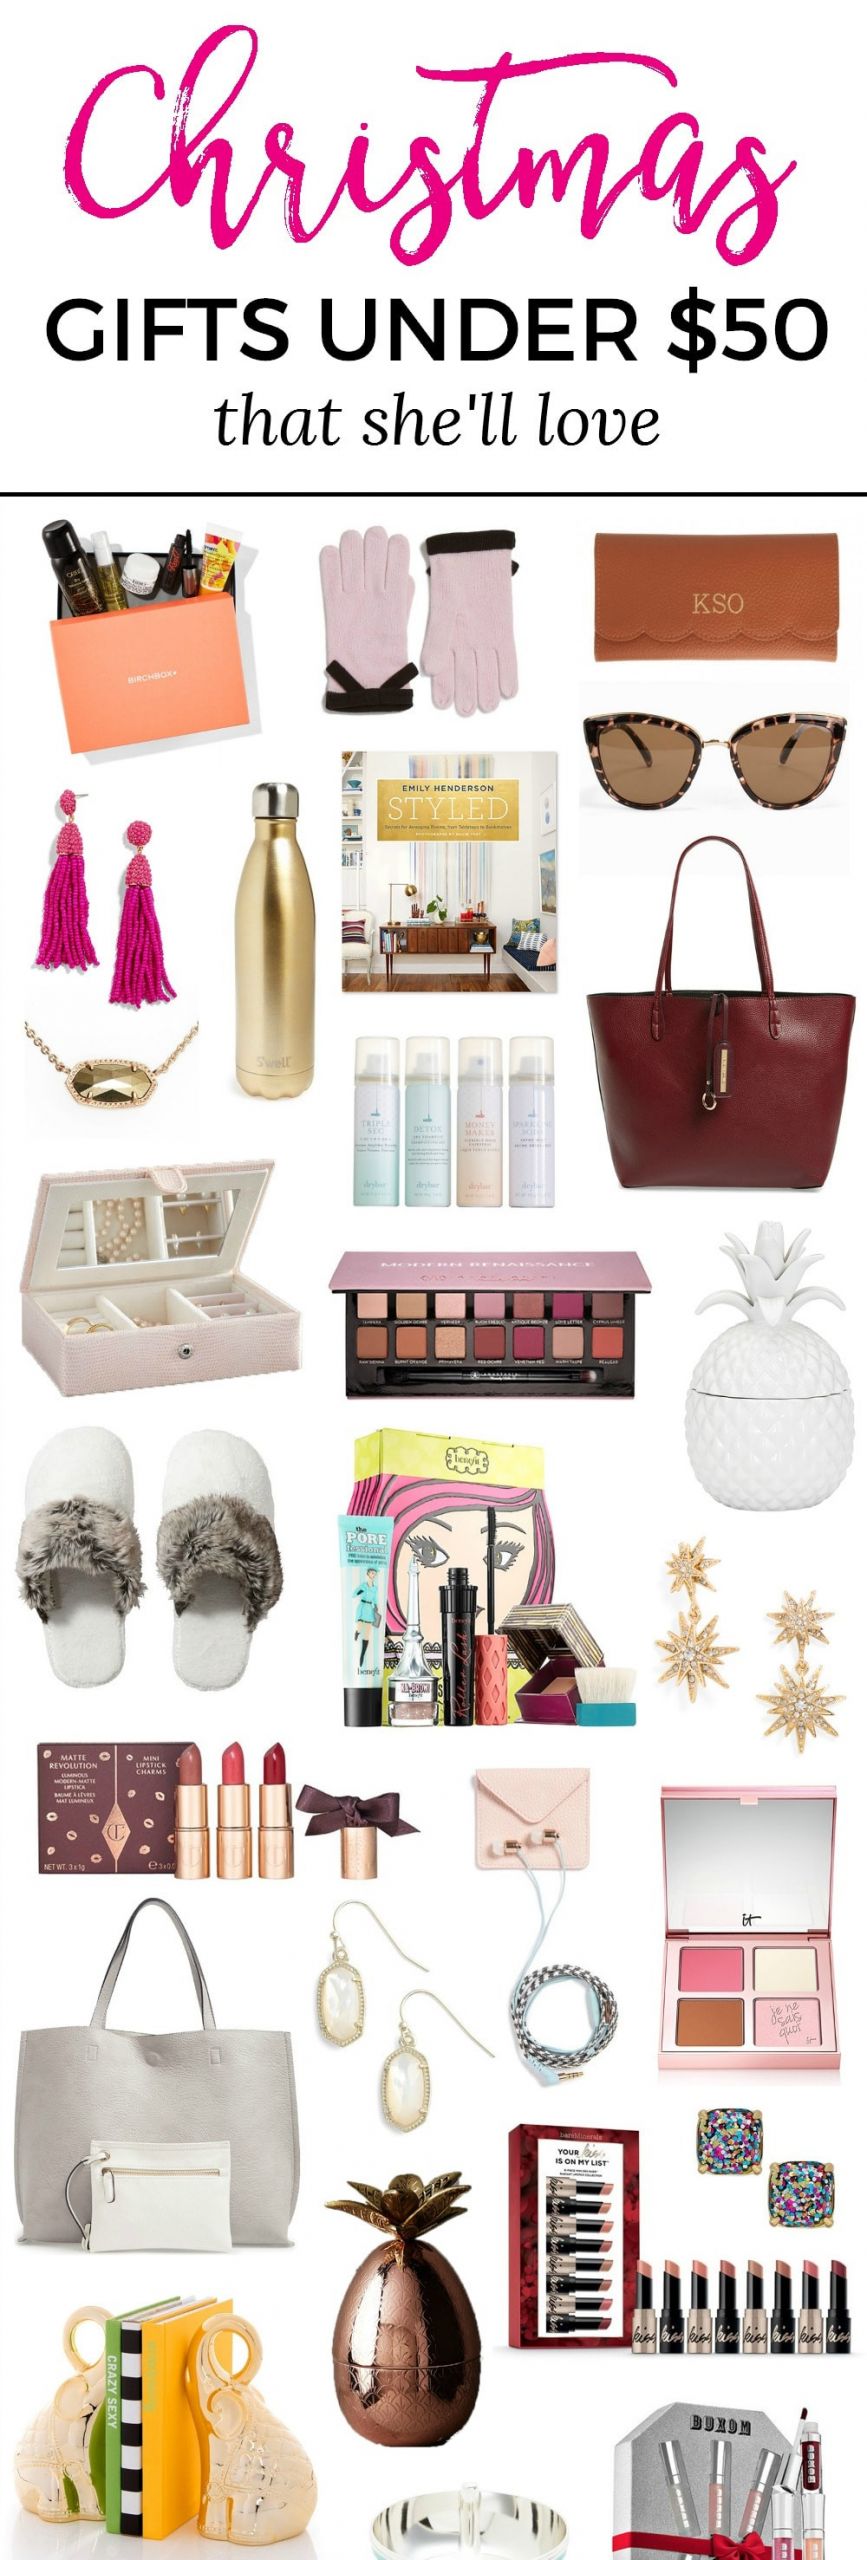 Best Christmas Gifts
 The Best Christmas Gift Ideas for Women under $50